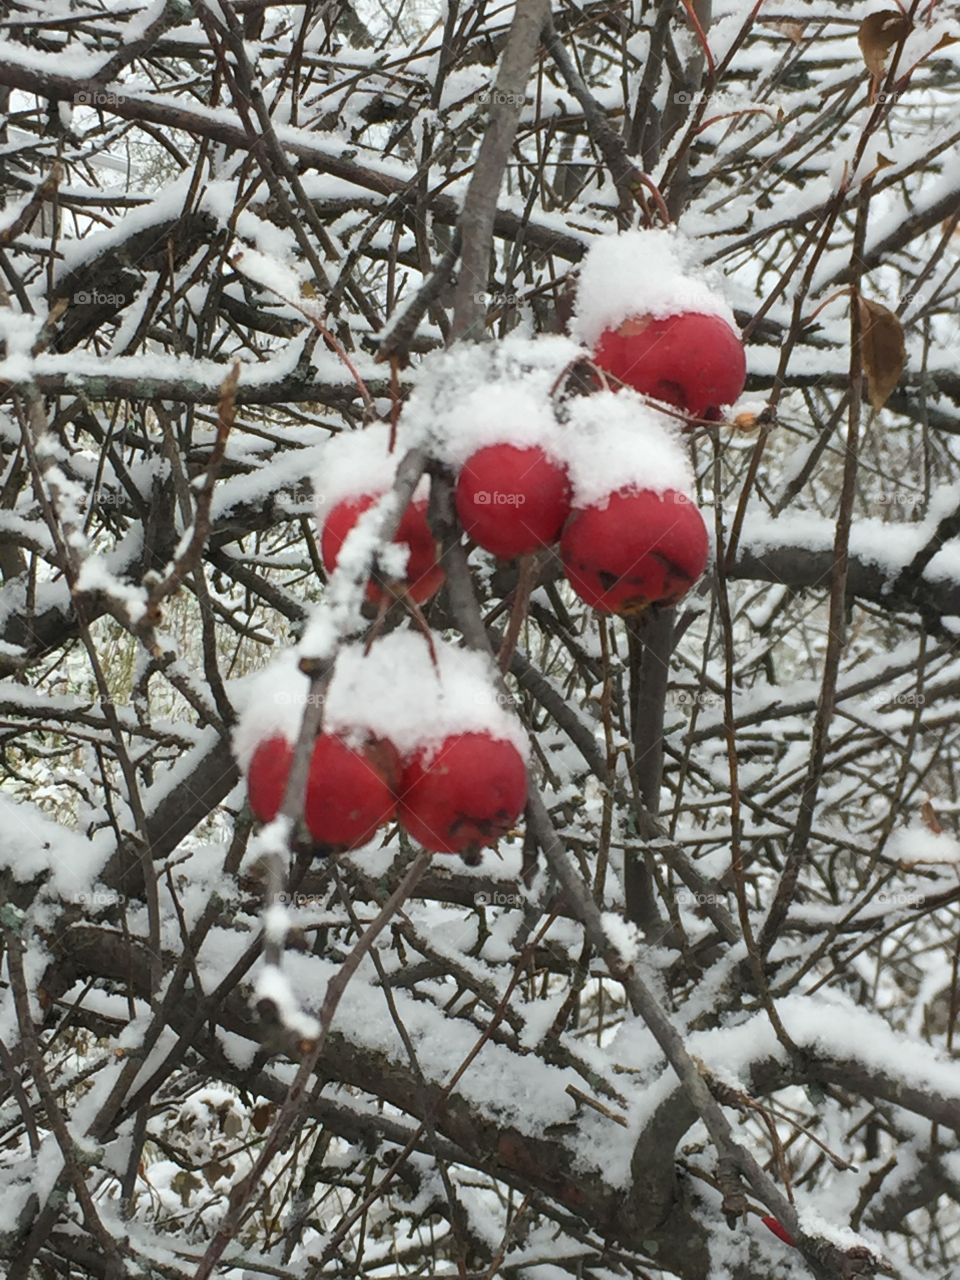 Crabapples that haven’t fallen from the tree in the snow ad  a beautiful pop of red .